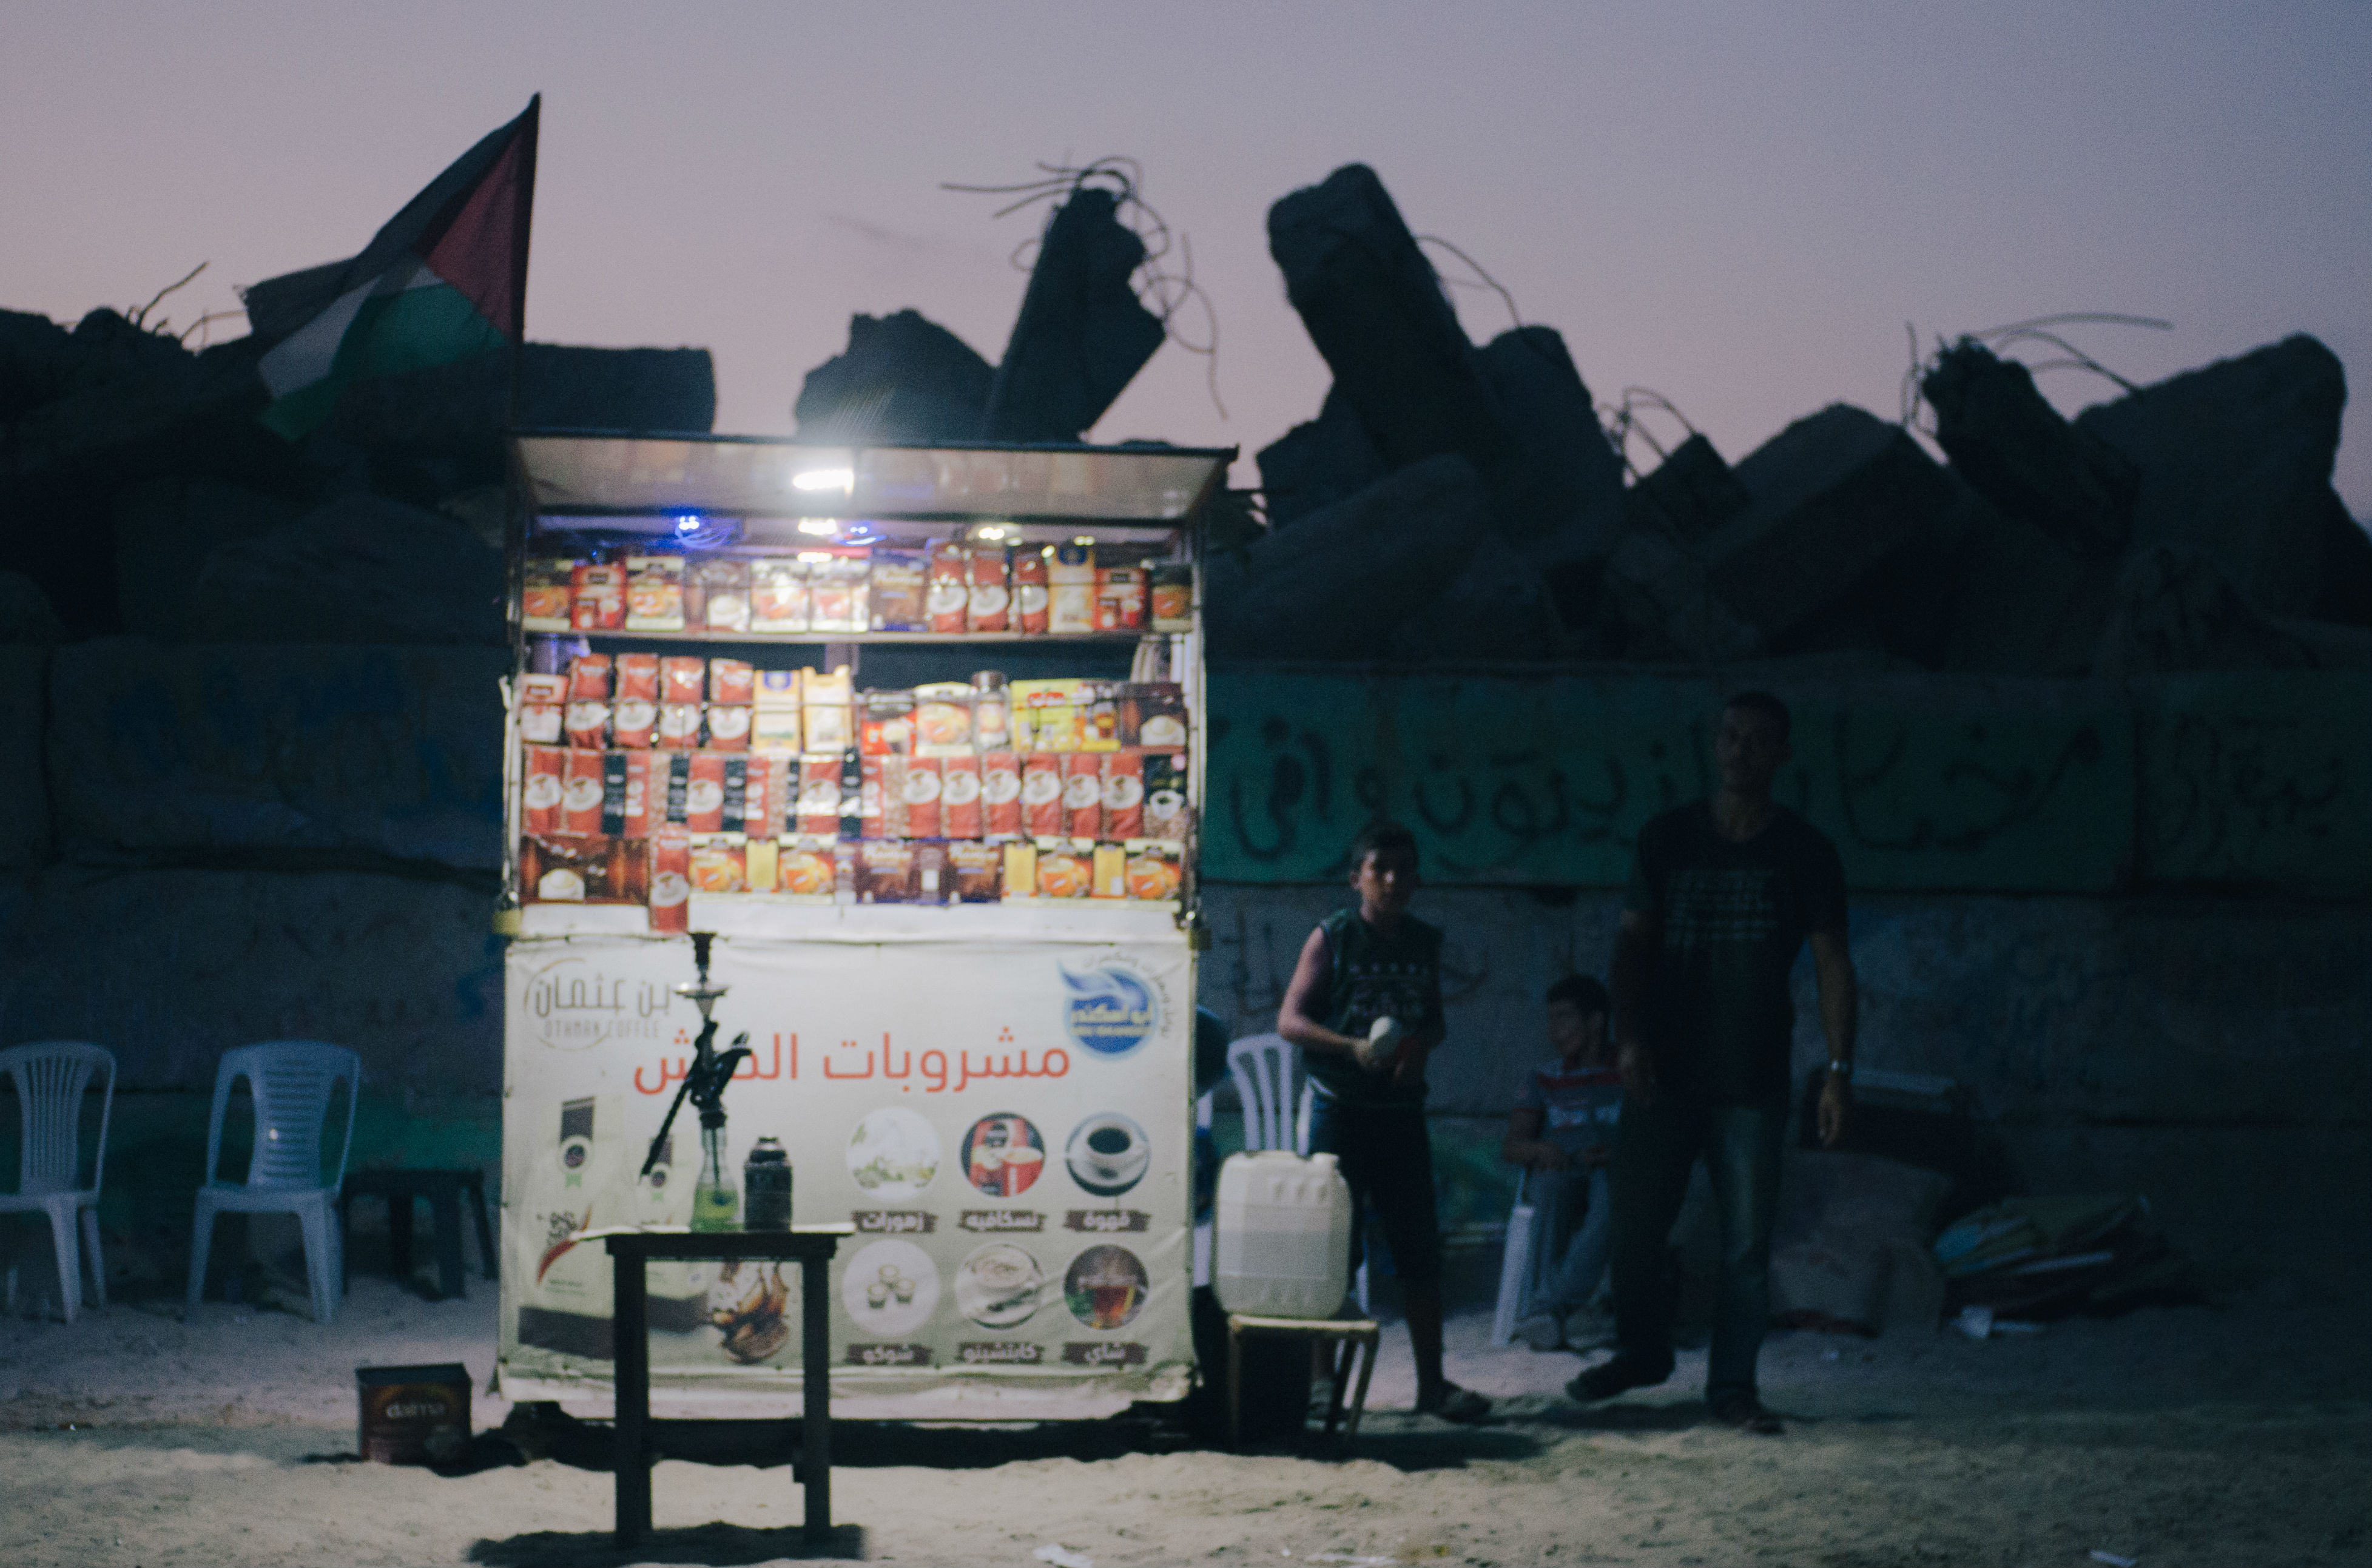 As the sun sets on Gaza, little pinpricks of light begin dotting the darkened coastline. Battery-powered LEDs fastened to coffee stalls cut against the night in the power-starved enclave, the only source of illumination for teen vendors preparing for nightly gatherings by the sea